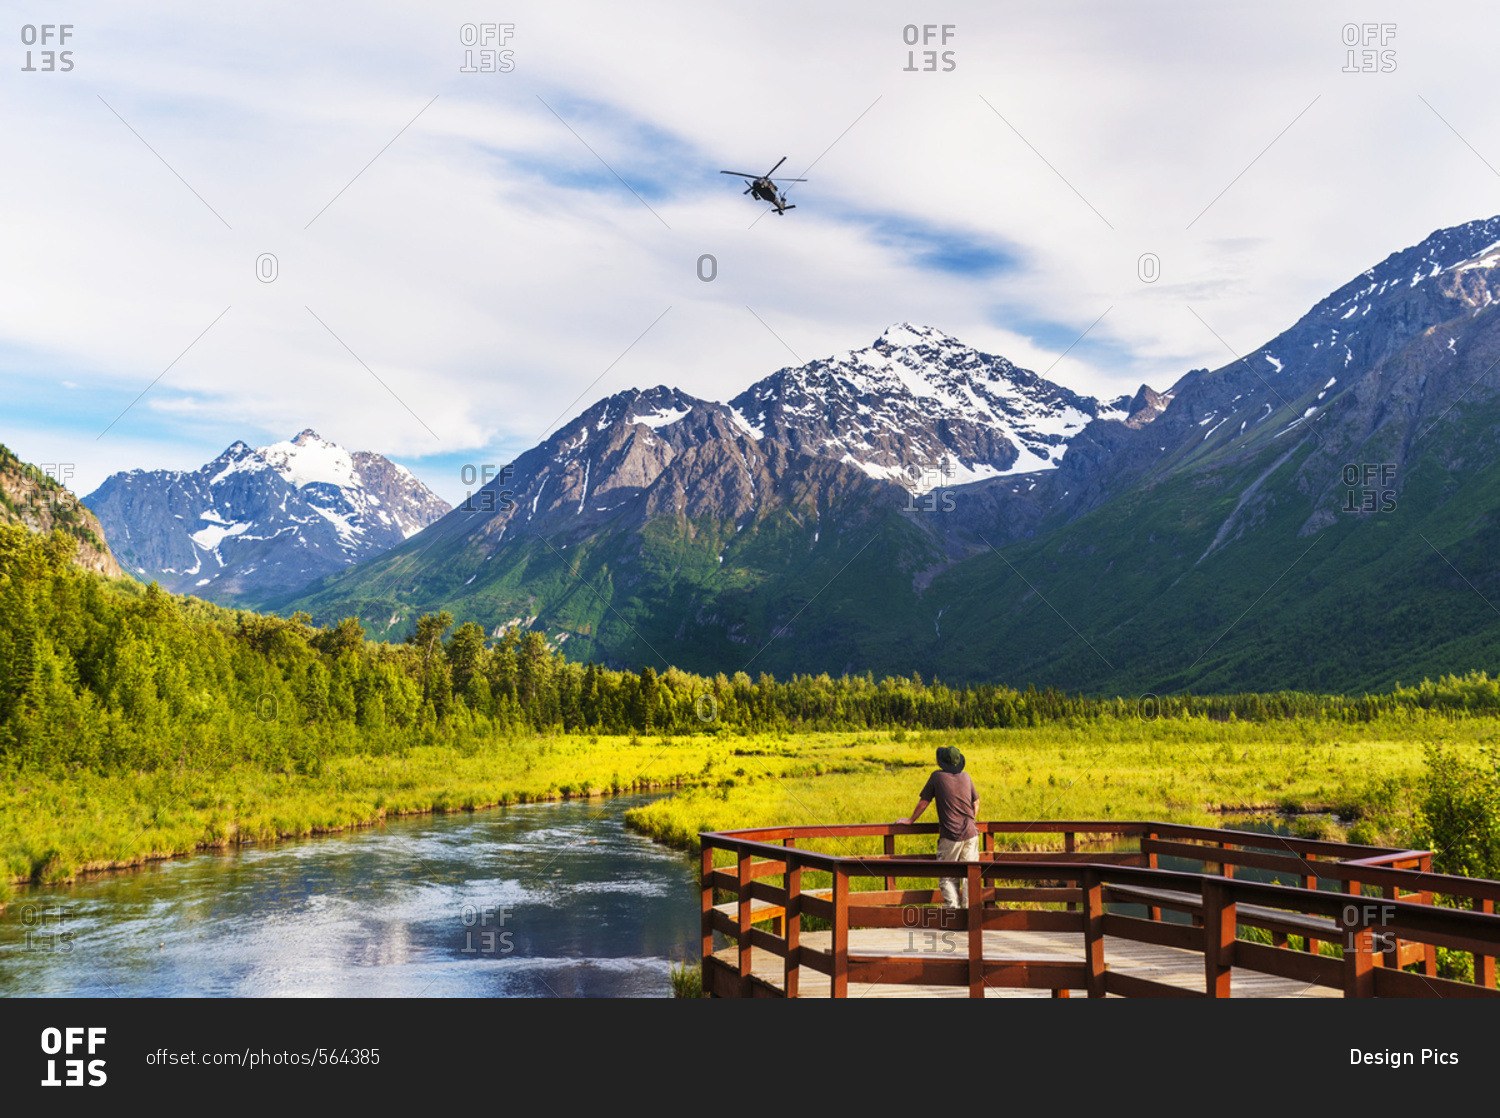 A man is standing on the Eagle River Nature Center boardwalk while a Black Hawk helicopter flies over head in the Chugach State Park in South-central Alaska, USA